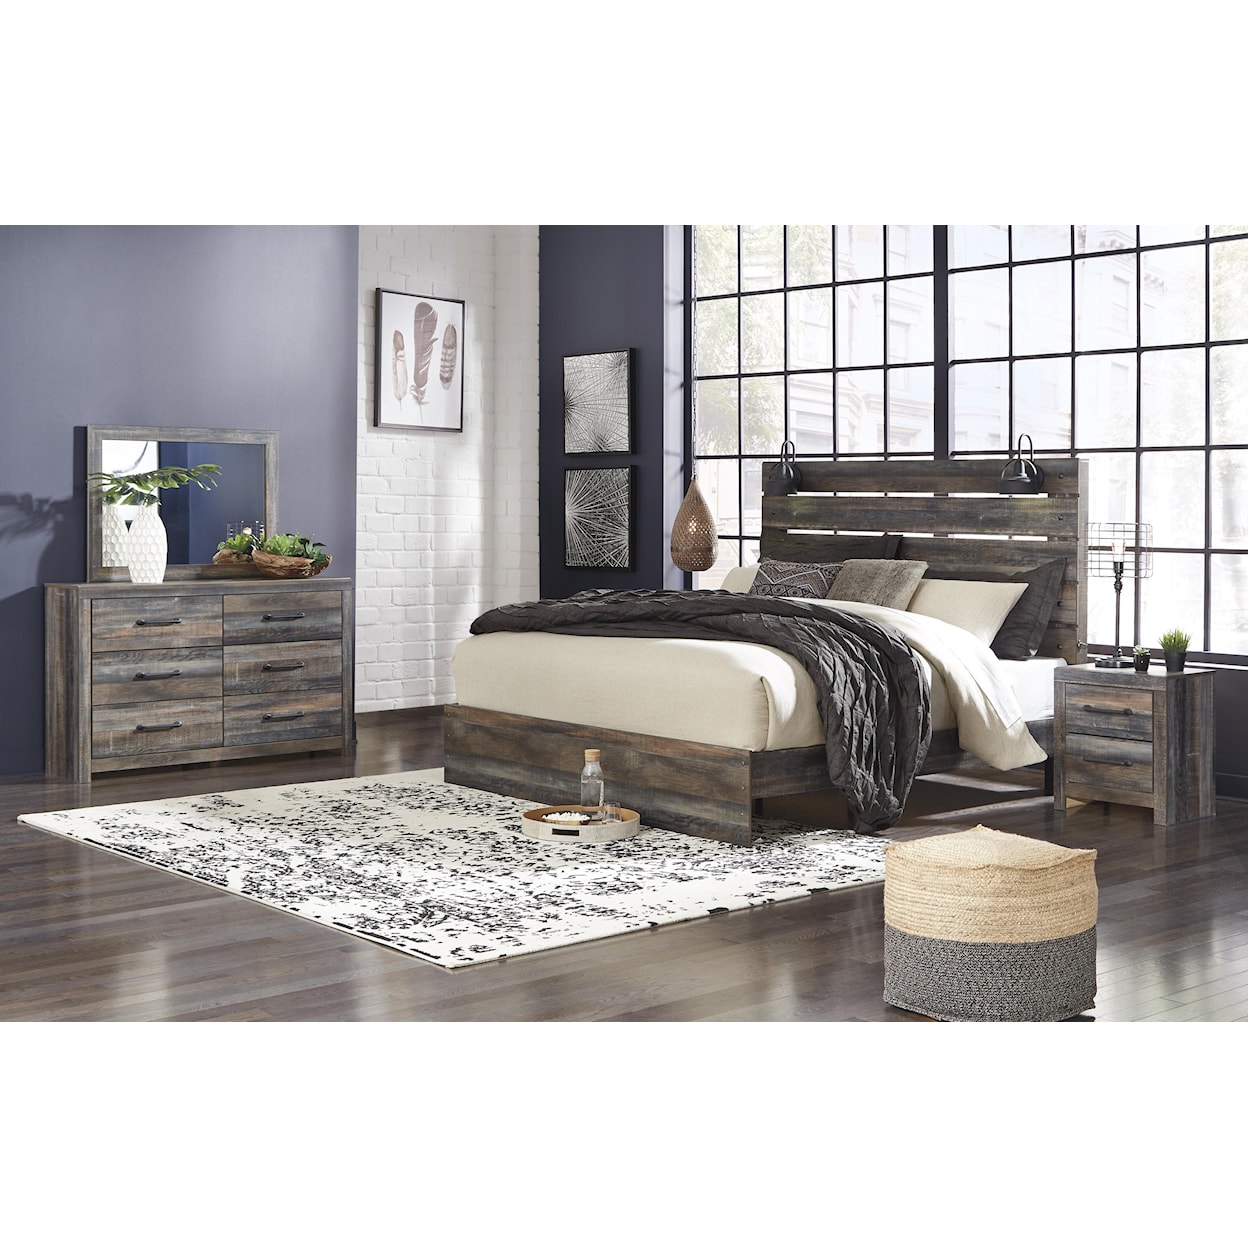 Signature Design by Ashley Drystan 5PC QUEEN BEDROOM GROUP